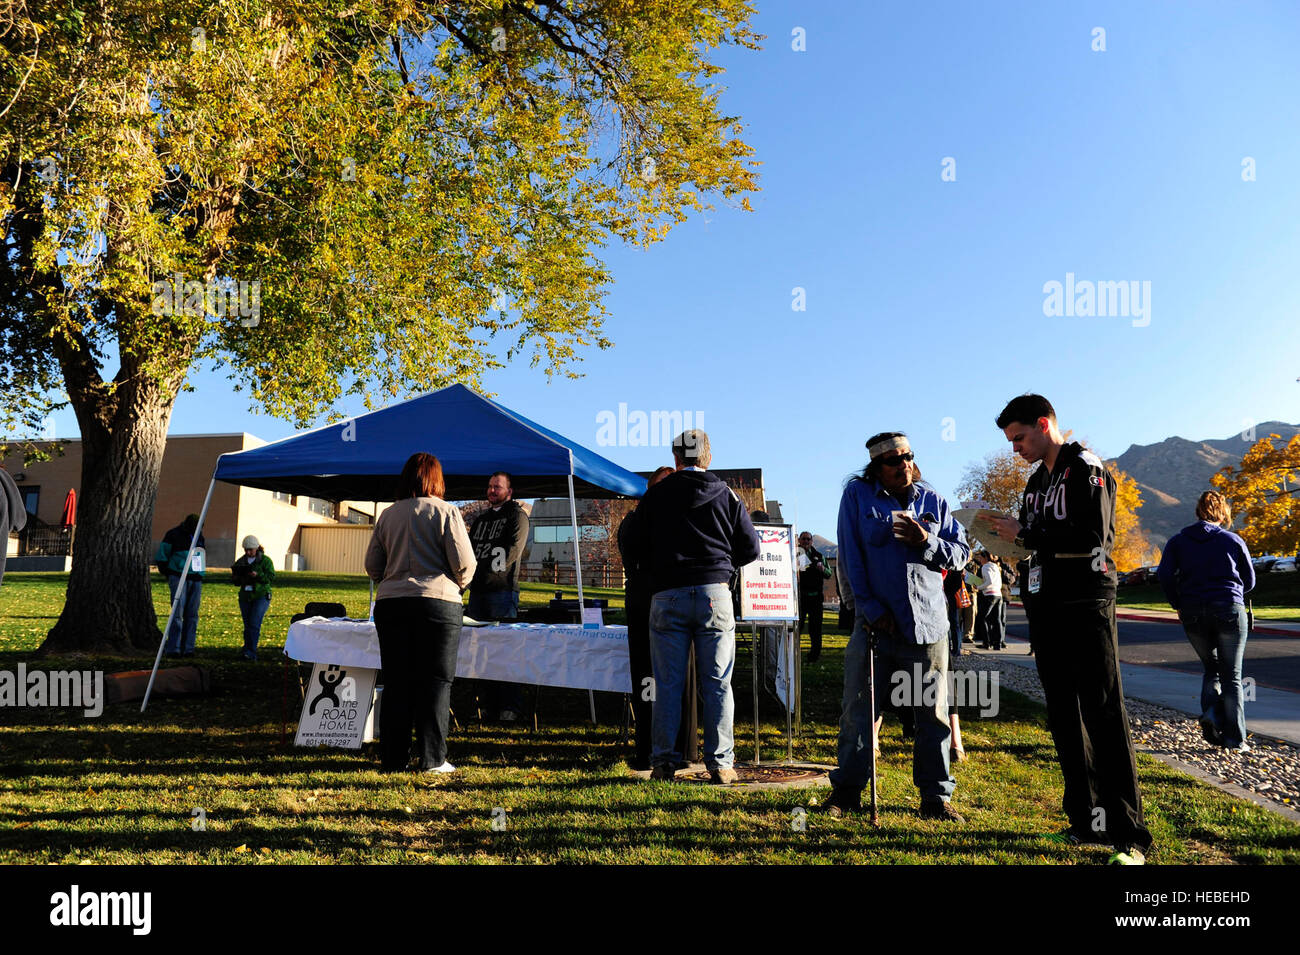 Rick LaRue (left), a U.S. Army veteran, checks in with Trevor Harris (right), a registered nurse at the George E. Wahlen Department of Veterans Affairs Medical Center during the annual Stand Down event, Salt Lake City, Utah, Nov. 2, 2012. Stand Downs are one part of the Department of Veterans Affairs’ efforts to provide services to homeless veterans. Stand Downs are typically one- to three-day events providing services to homeless veterans such as food, shelter, clothing, health screenings, VA and Social Security benefits counseling, and referrals to a variety of other necessary services, such Stock Photo